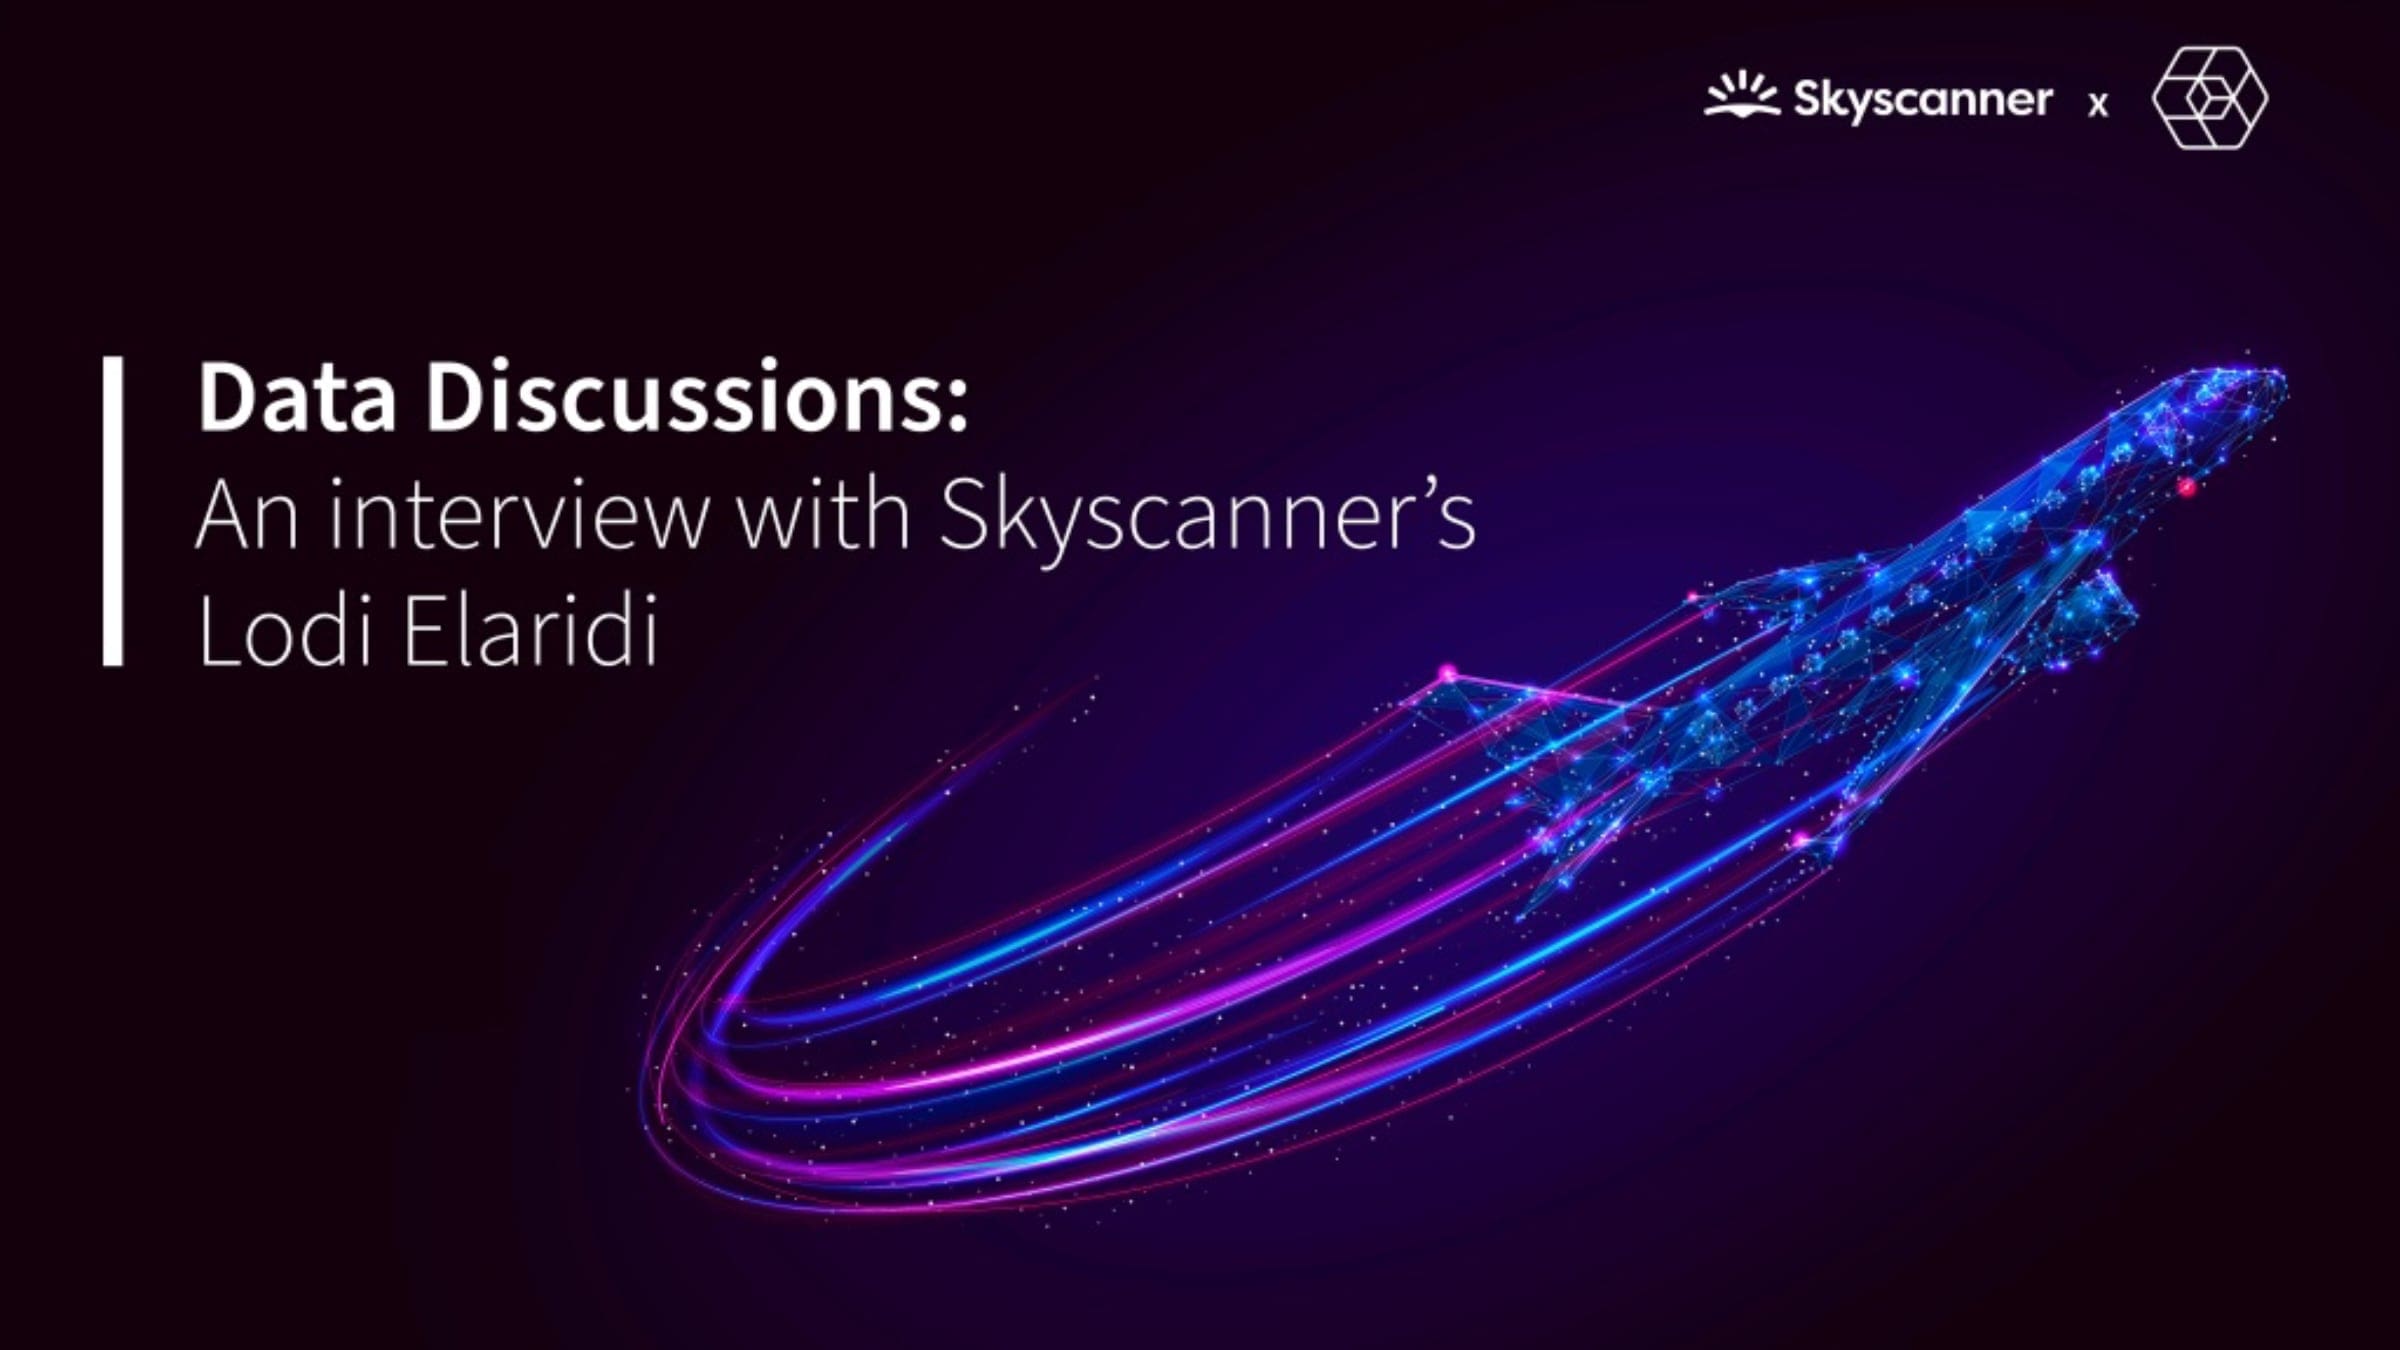 Data Discussions: Lodi Elaridi, Data Product Manager from Skyscanner